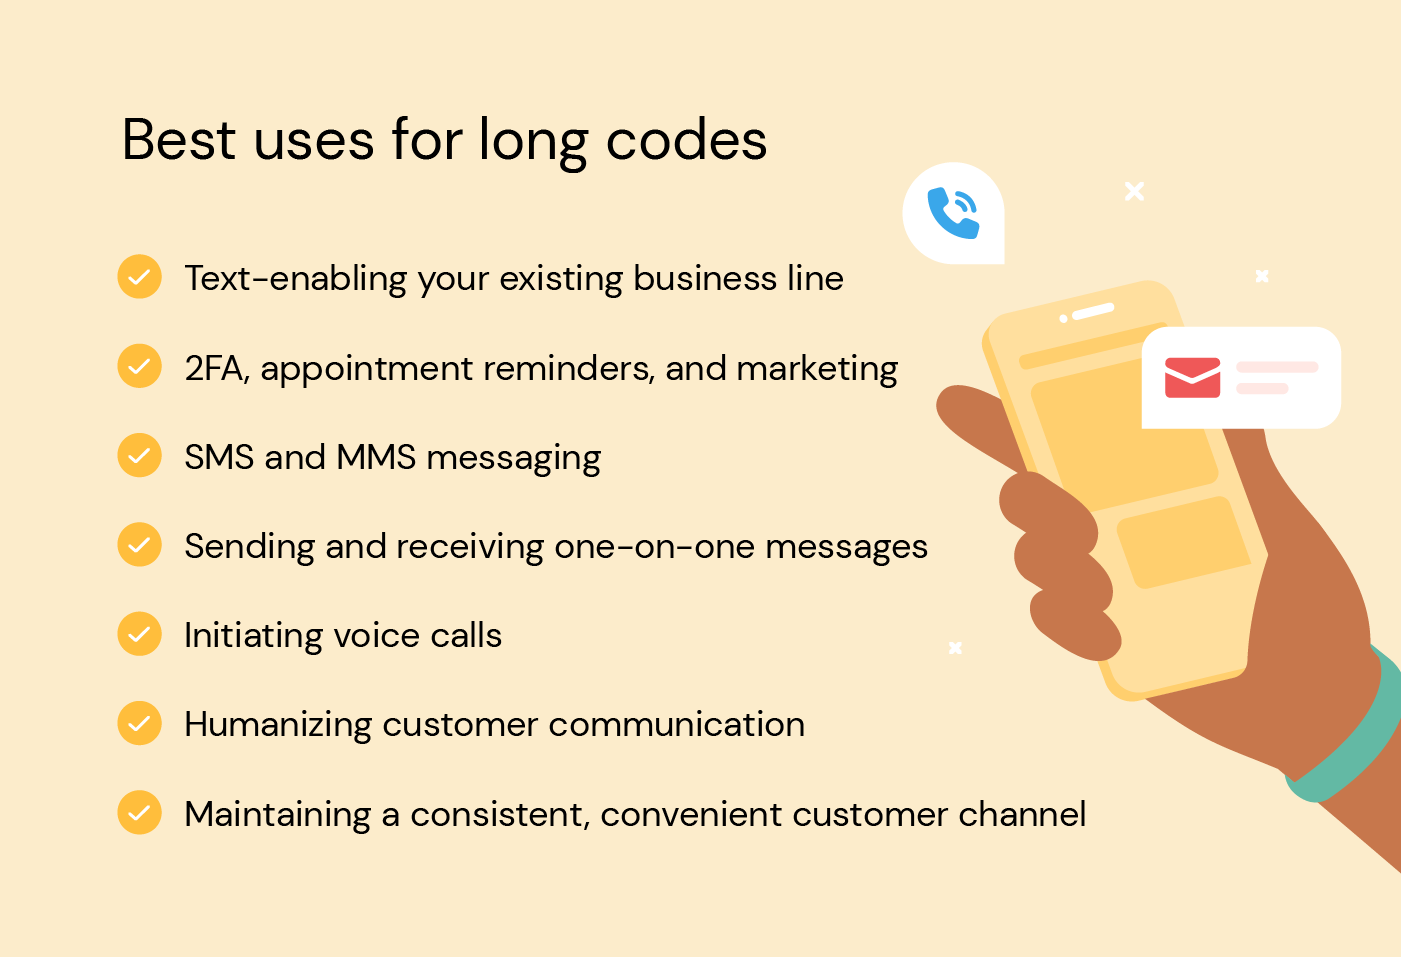 Best uses for long codes include text-enabling your existing business line, 2FA, appointment reminders, marketing efforts, SMS and MMS messaging, Sending and receiving one-on-one messages, initiating voice calls, humanizing customer communication, and maintaining a consistent, convenient customer channel. Illustration shows a hand holding a yellow phone.